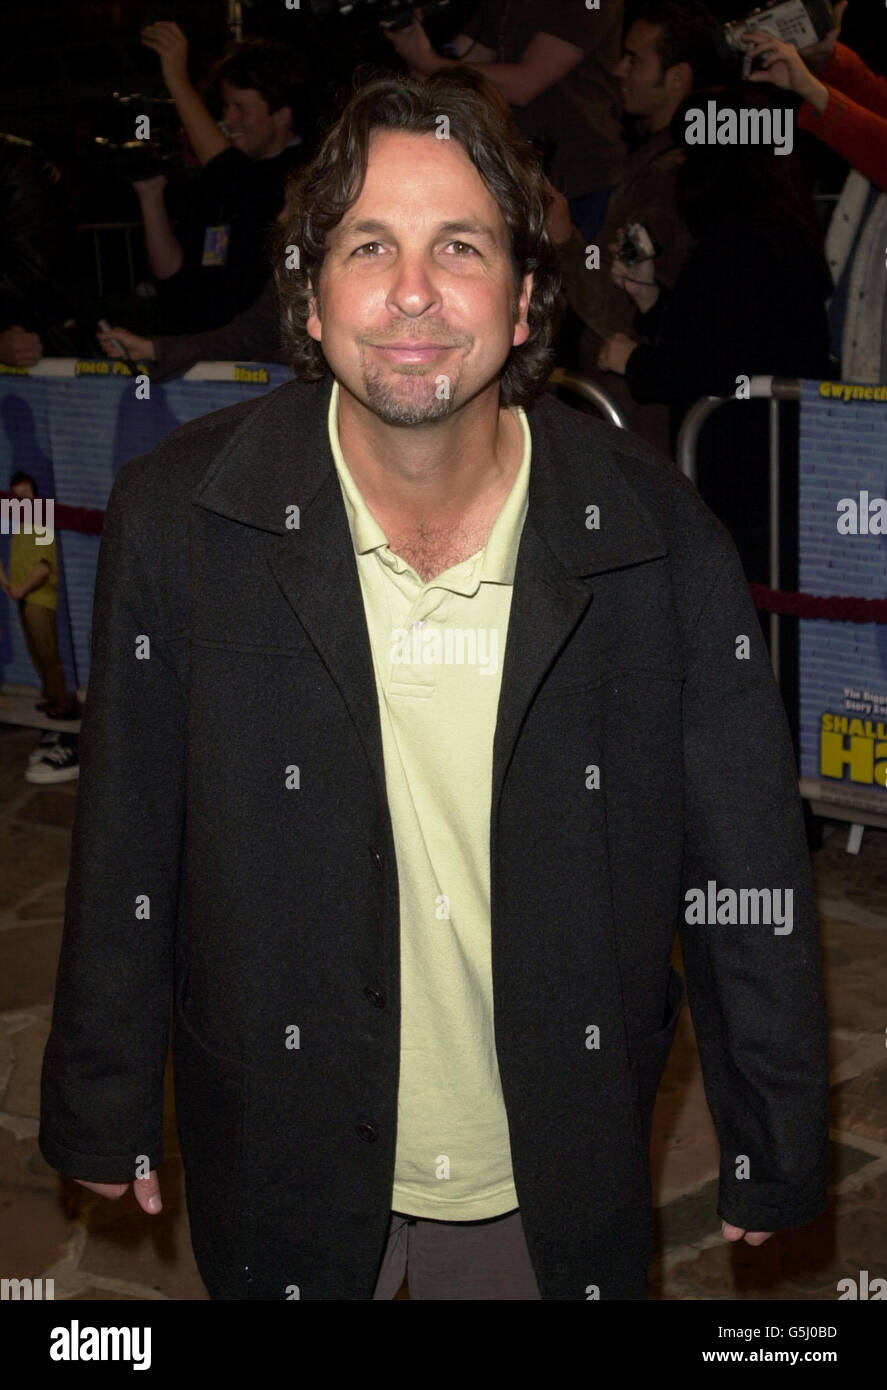 Director Peter Farley arrives at the premiere of his new film Shallow Hal at the Manns Village Theatre in Los Angeles. Stock Photo